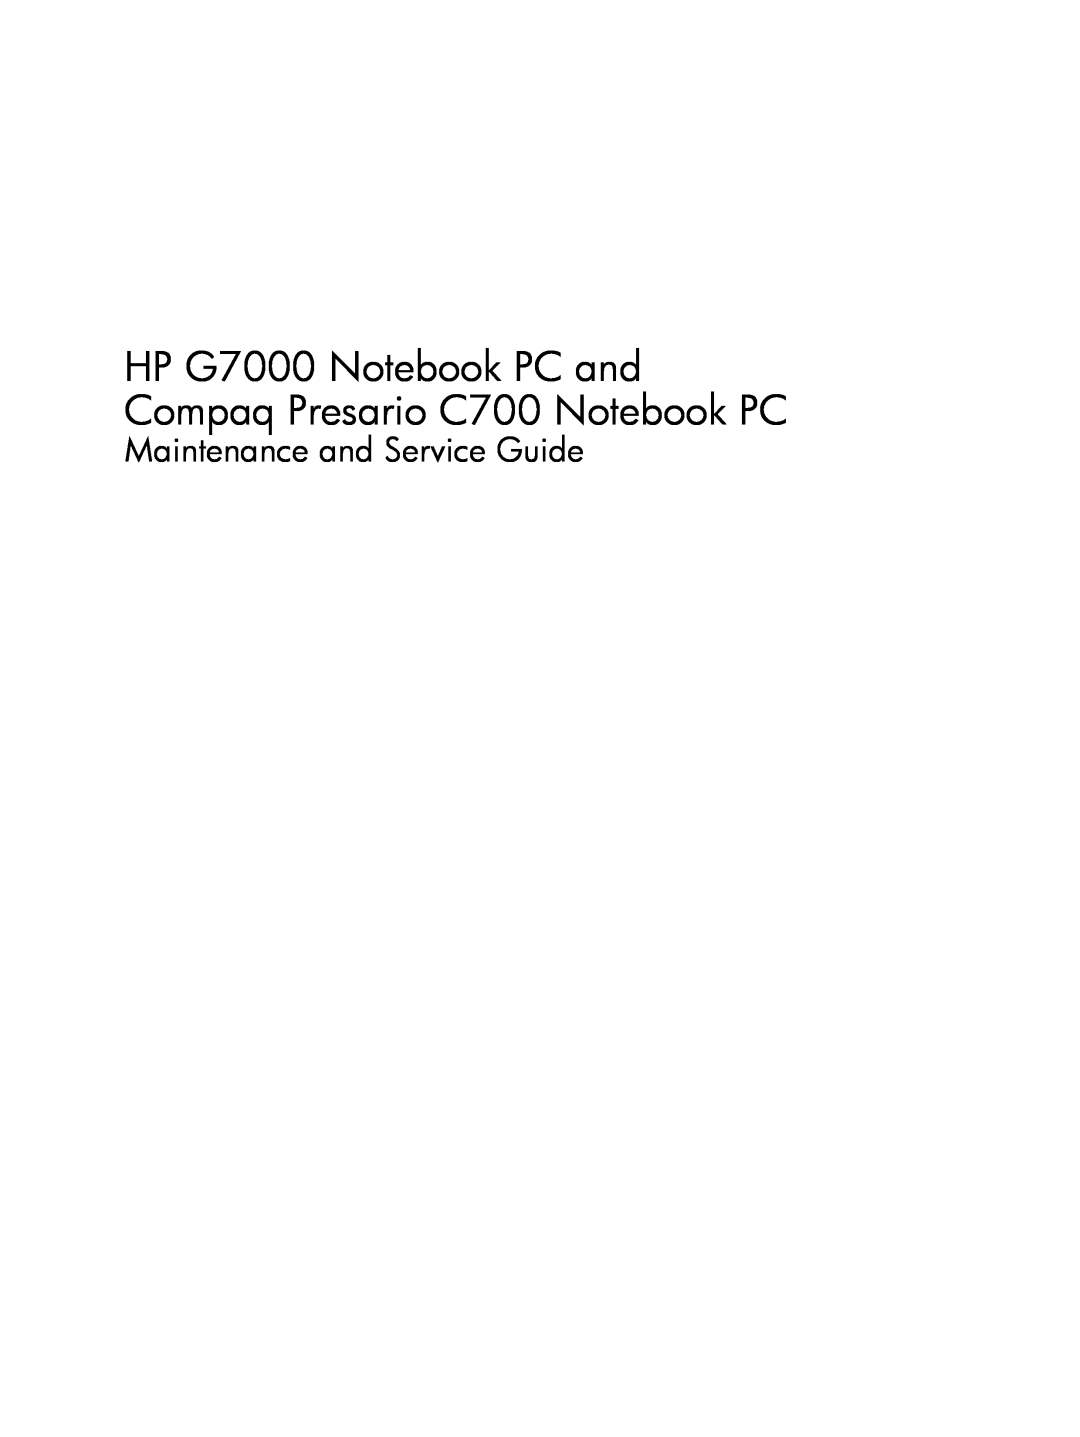 HP C725BR, C721TU, C718TU manual HP G7000 Notebook PC and Compaq Presario C700 Notebook PC, Maintenance and Service Guide 